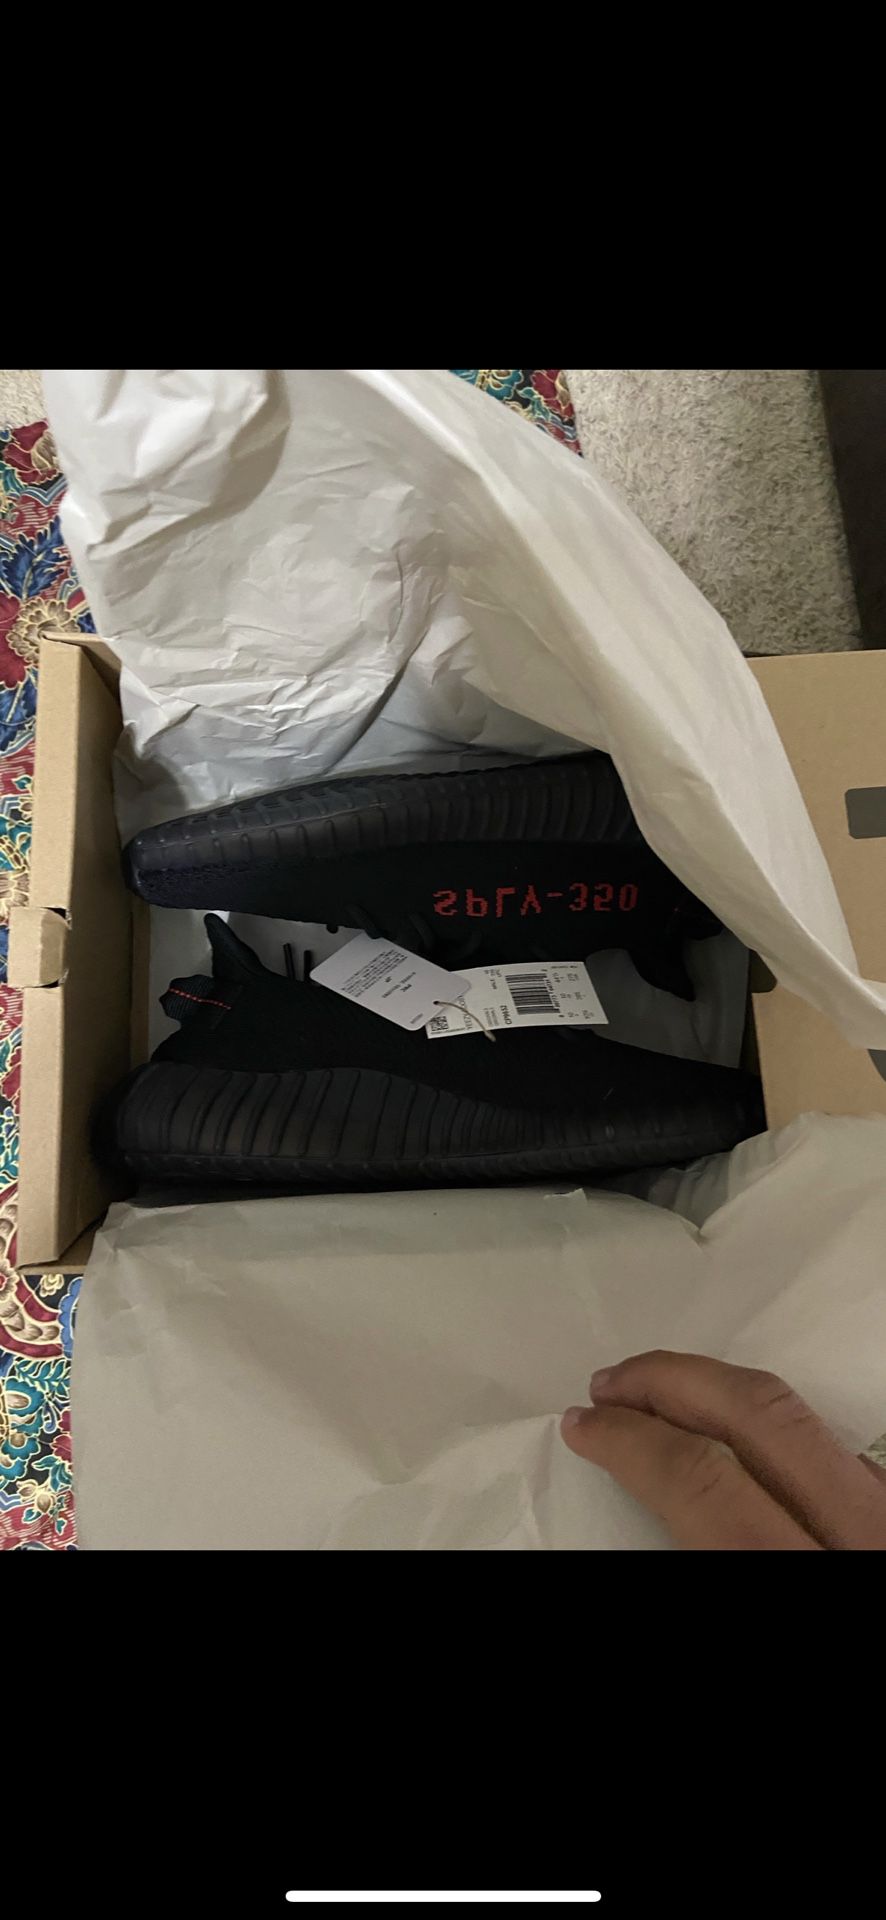 Adidas Yeezy Boost 350 V2 Black Red (2020) Size 11